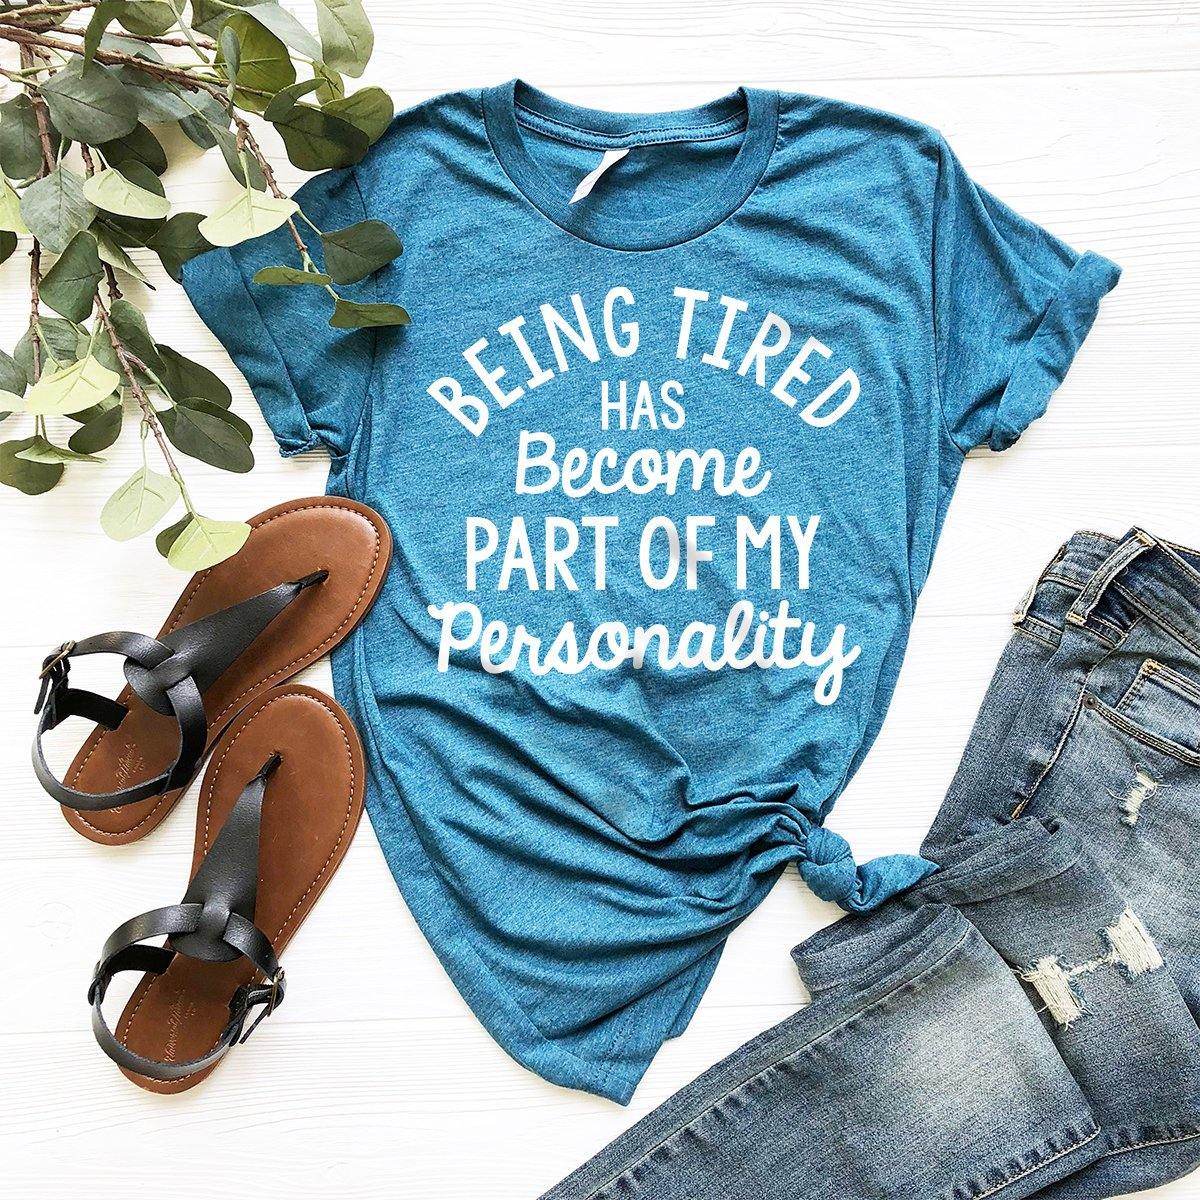 New Mom Shirt, Tired Mom T-Shirt, Funny Sarcastic Tee, Sarcastic Shirt, Sarcasm Shirt, Being Tired Has Become Part Of My Personality T Shirt - Fastdeliverytees.com